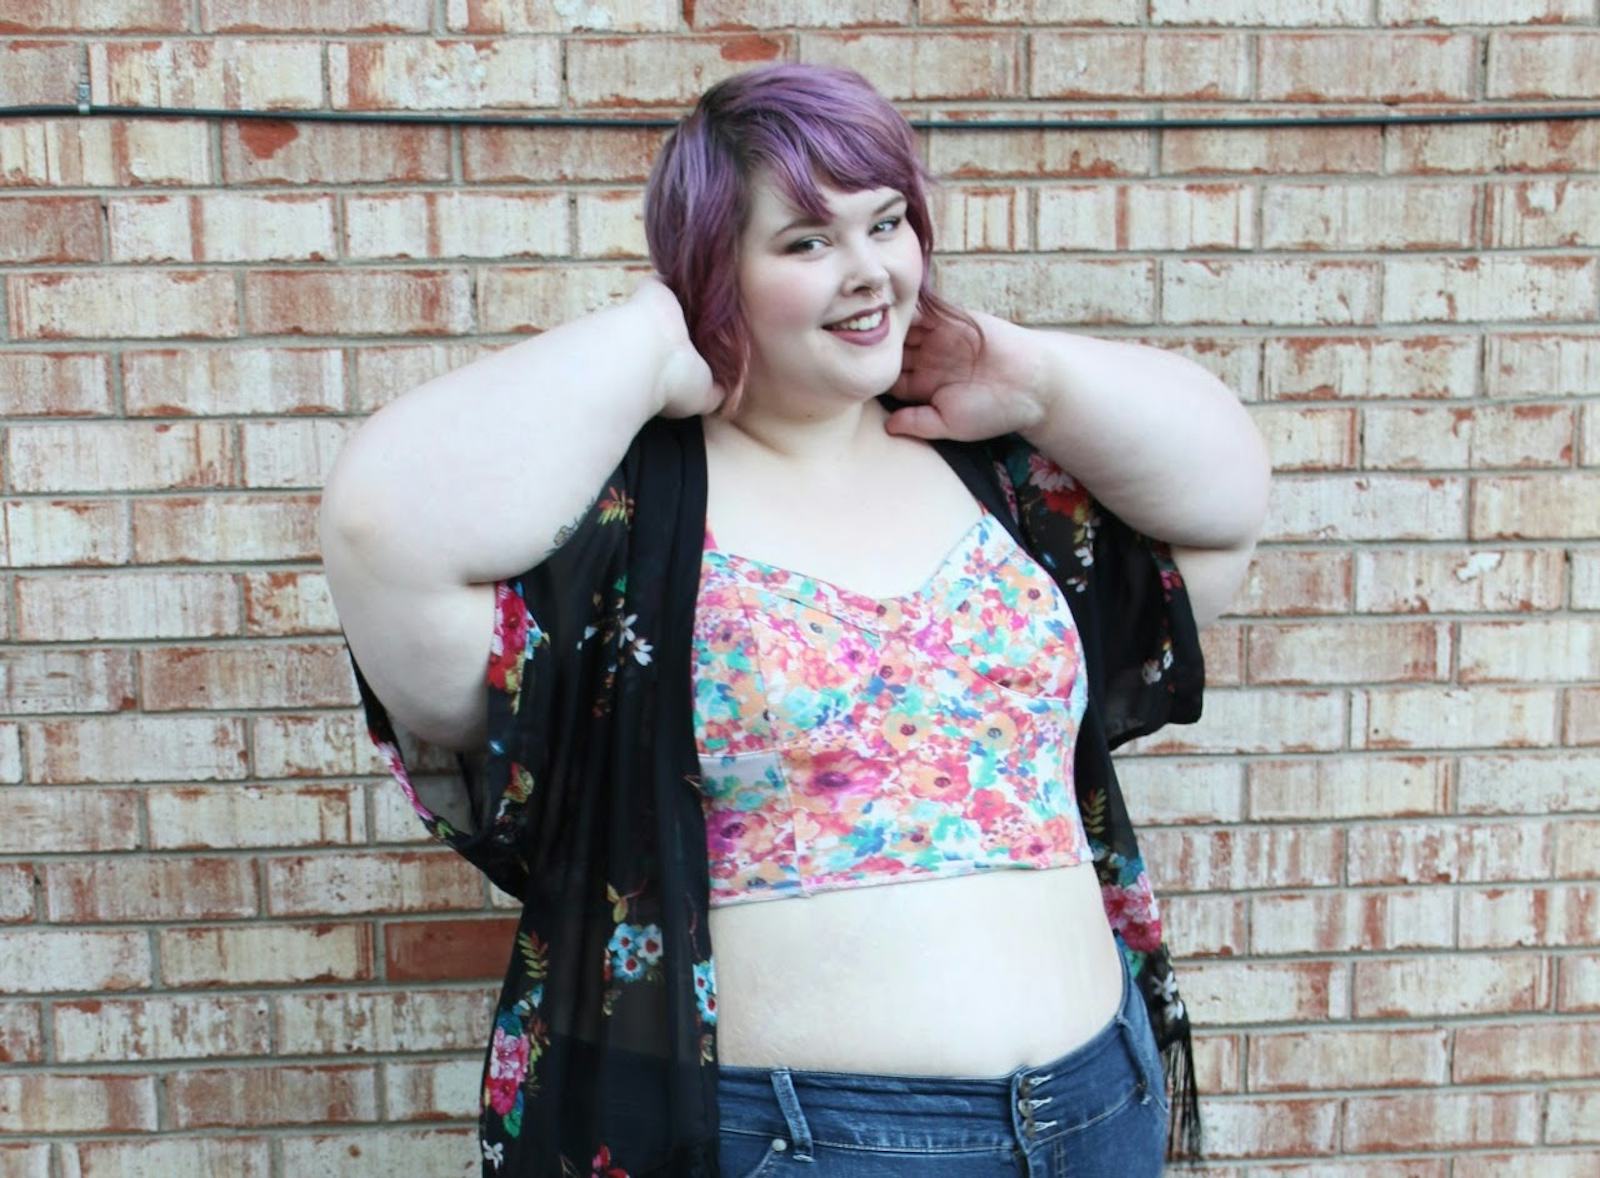 56 Photos Of Plus Size Individuals With Small Boobs Beca picture photo